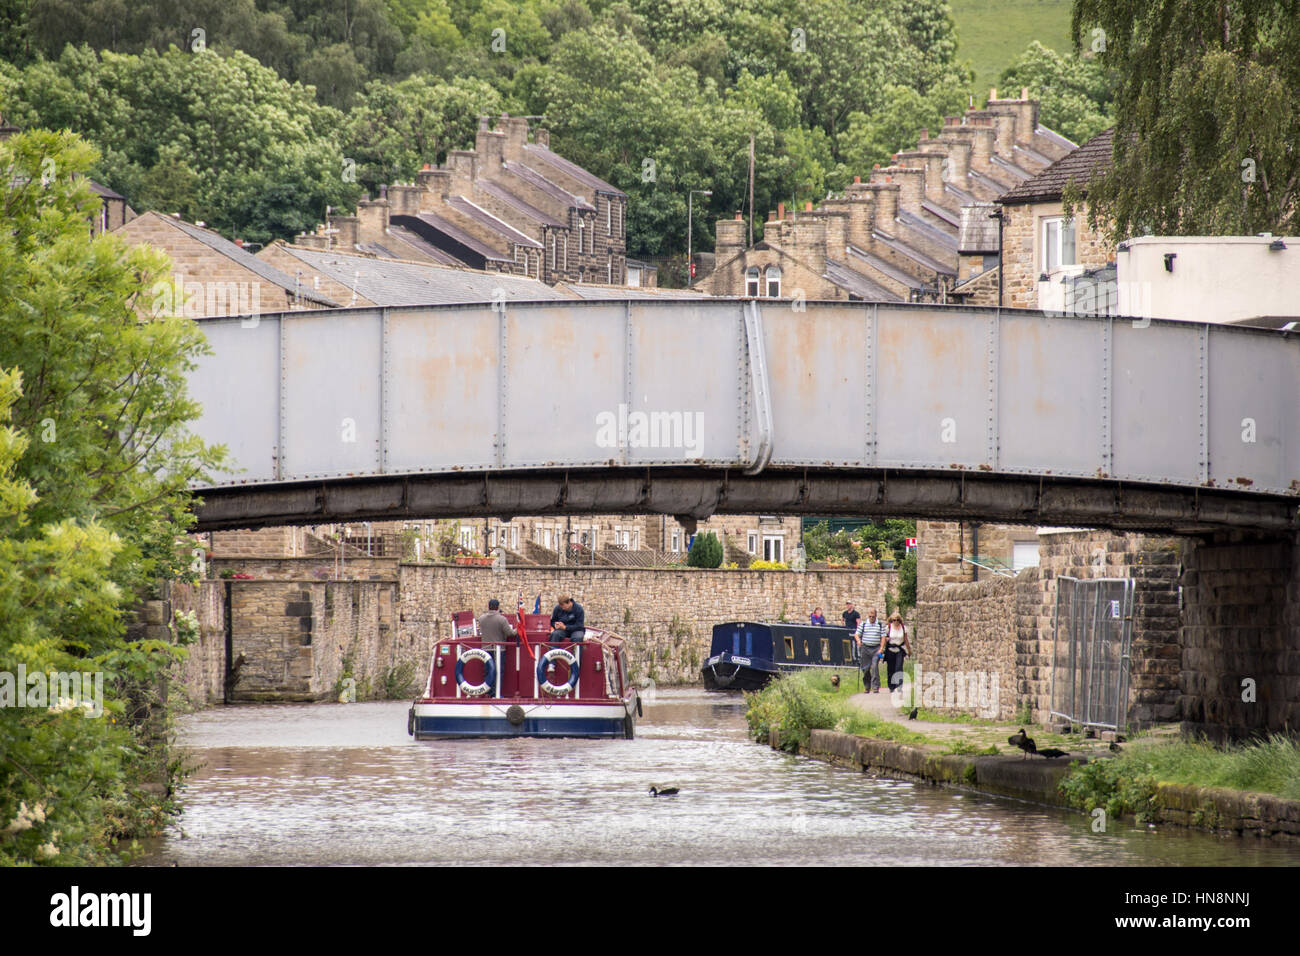 England, Yorkshire, Skipton - Riverboats in a canal that flows through the town of Skipton, a market town and civil parish in the Craven district of N Stock Photo